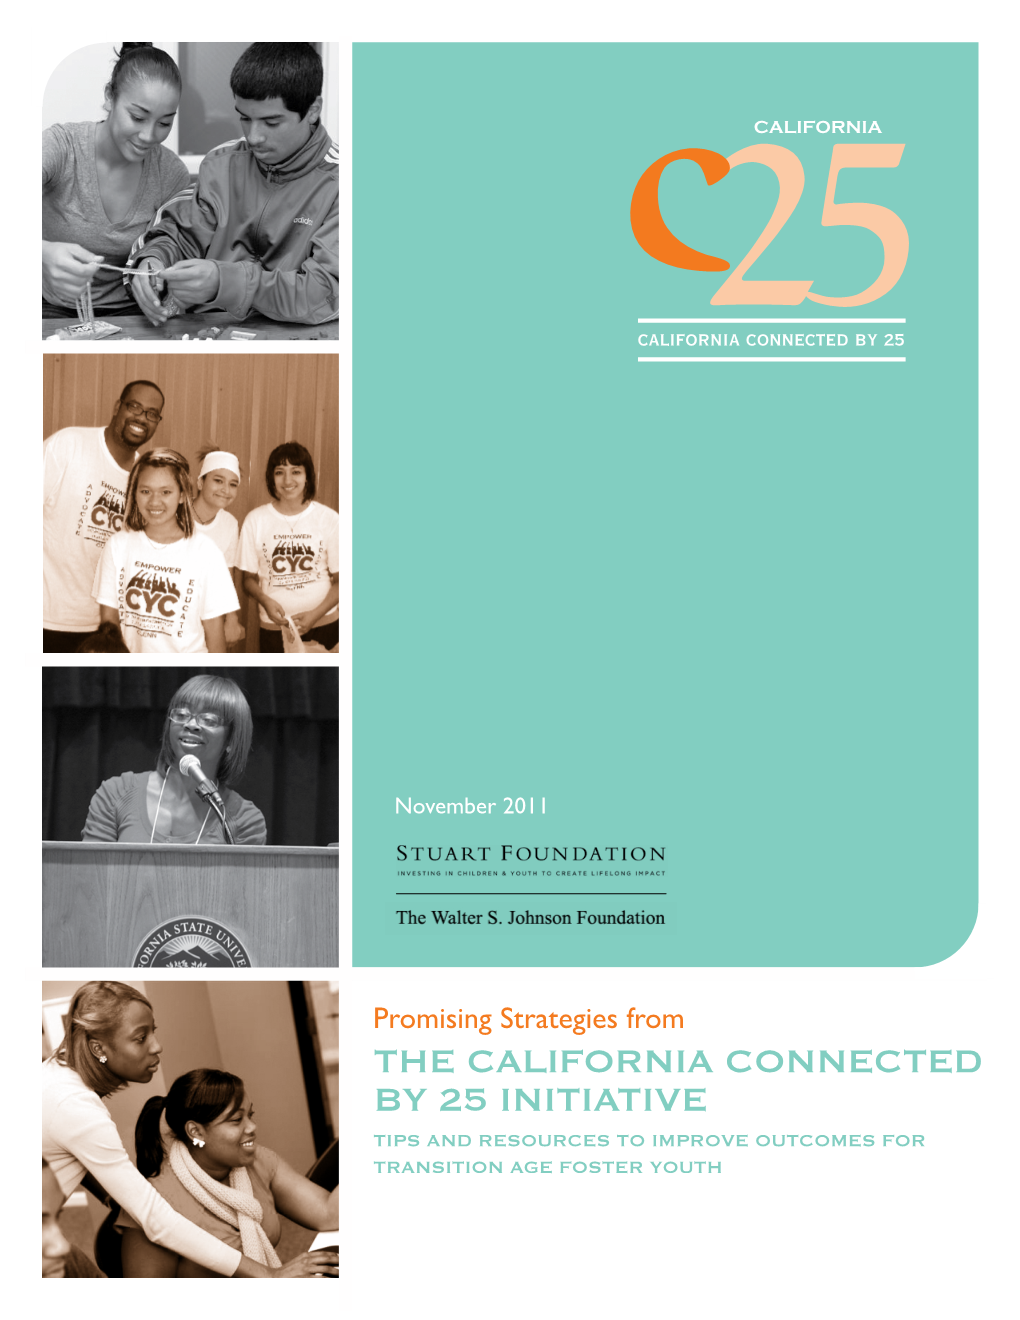 The CALIFORNIA CONNECTED by 25 INITIATIVE